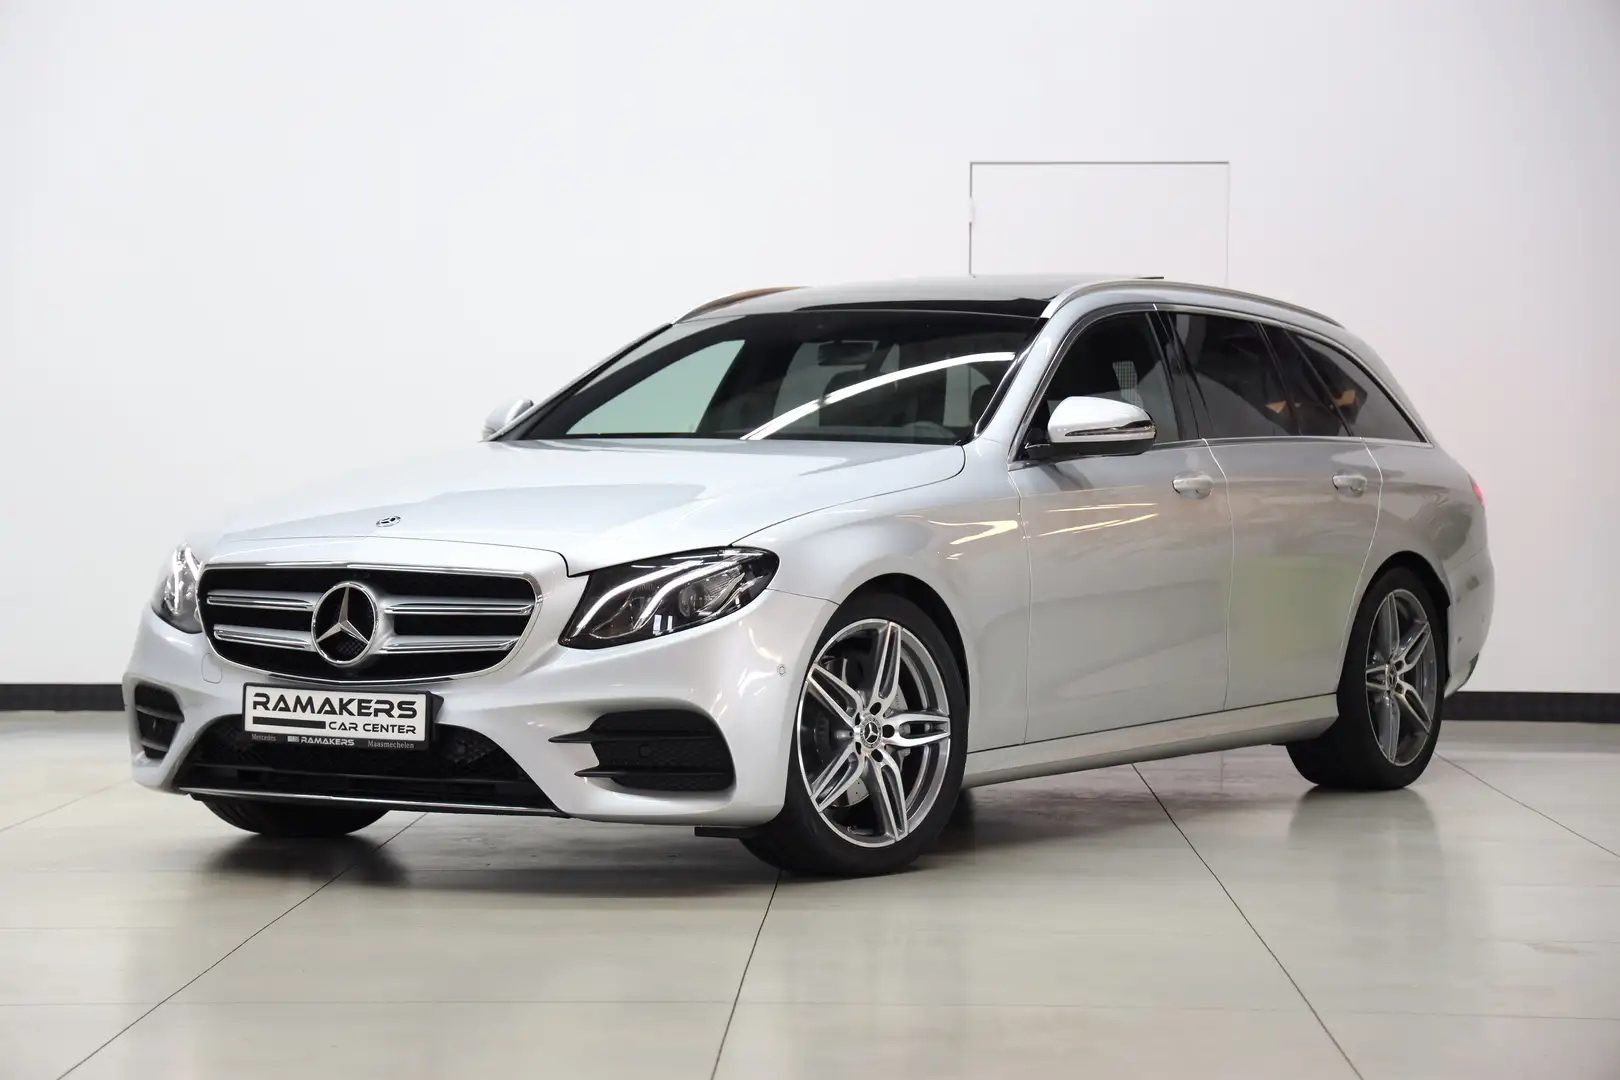 Mercedes-Benz E 200 d T | AMG Line PANORAMA LED Sfeerlicht Camera Argent - 1